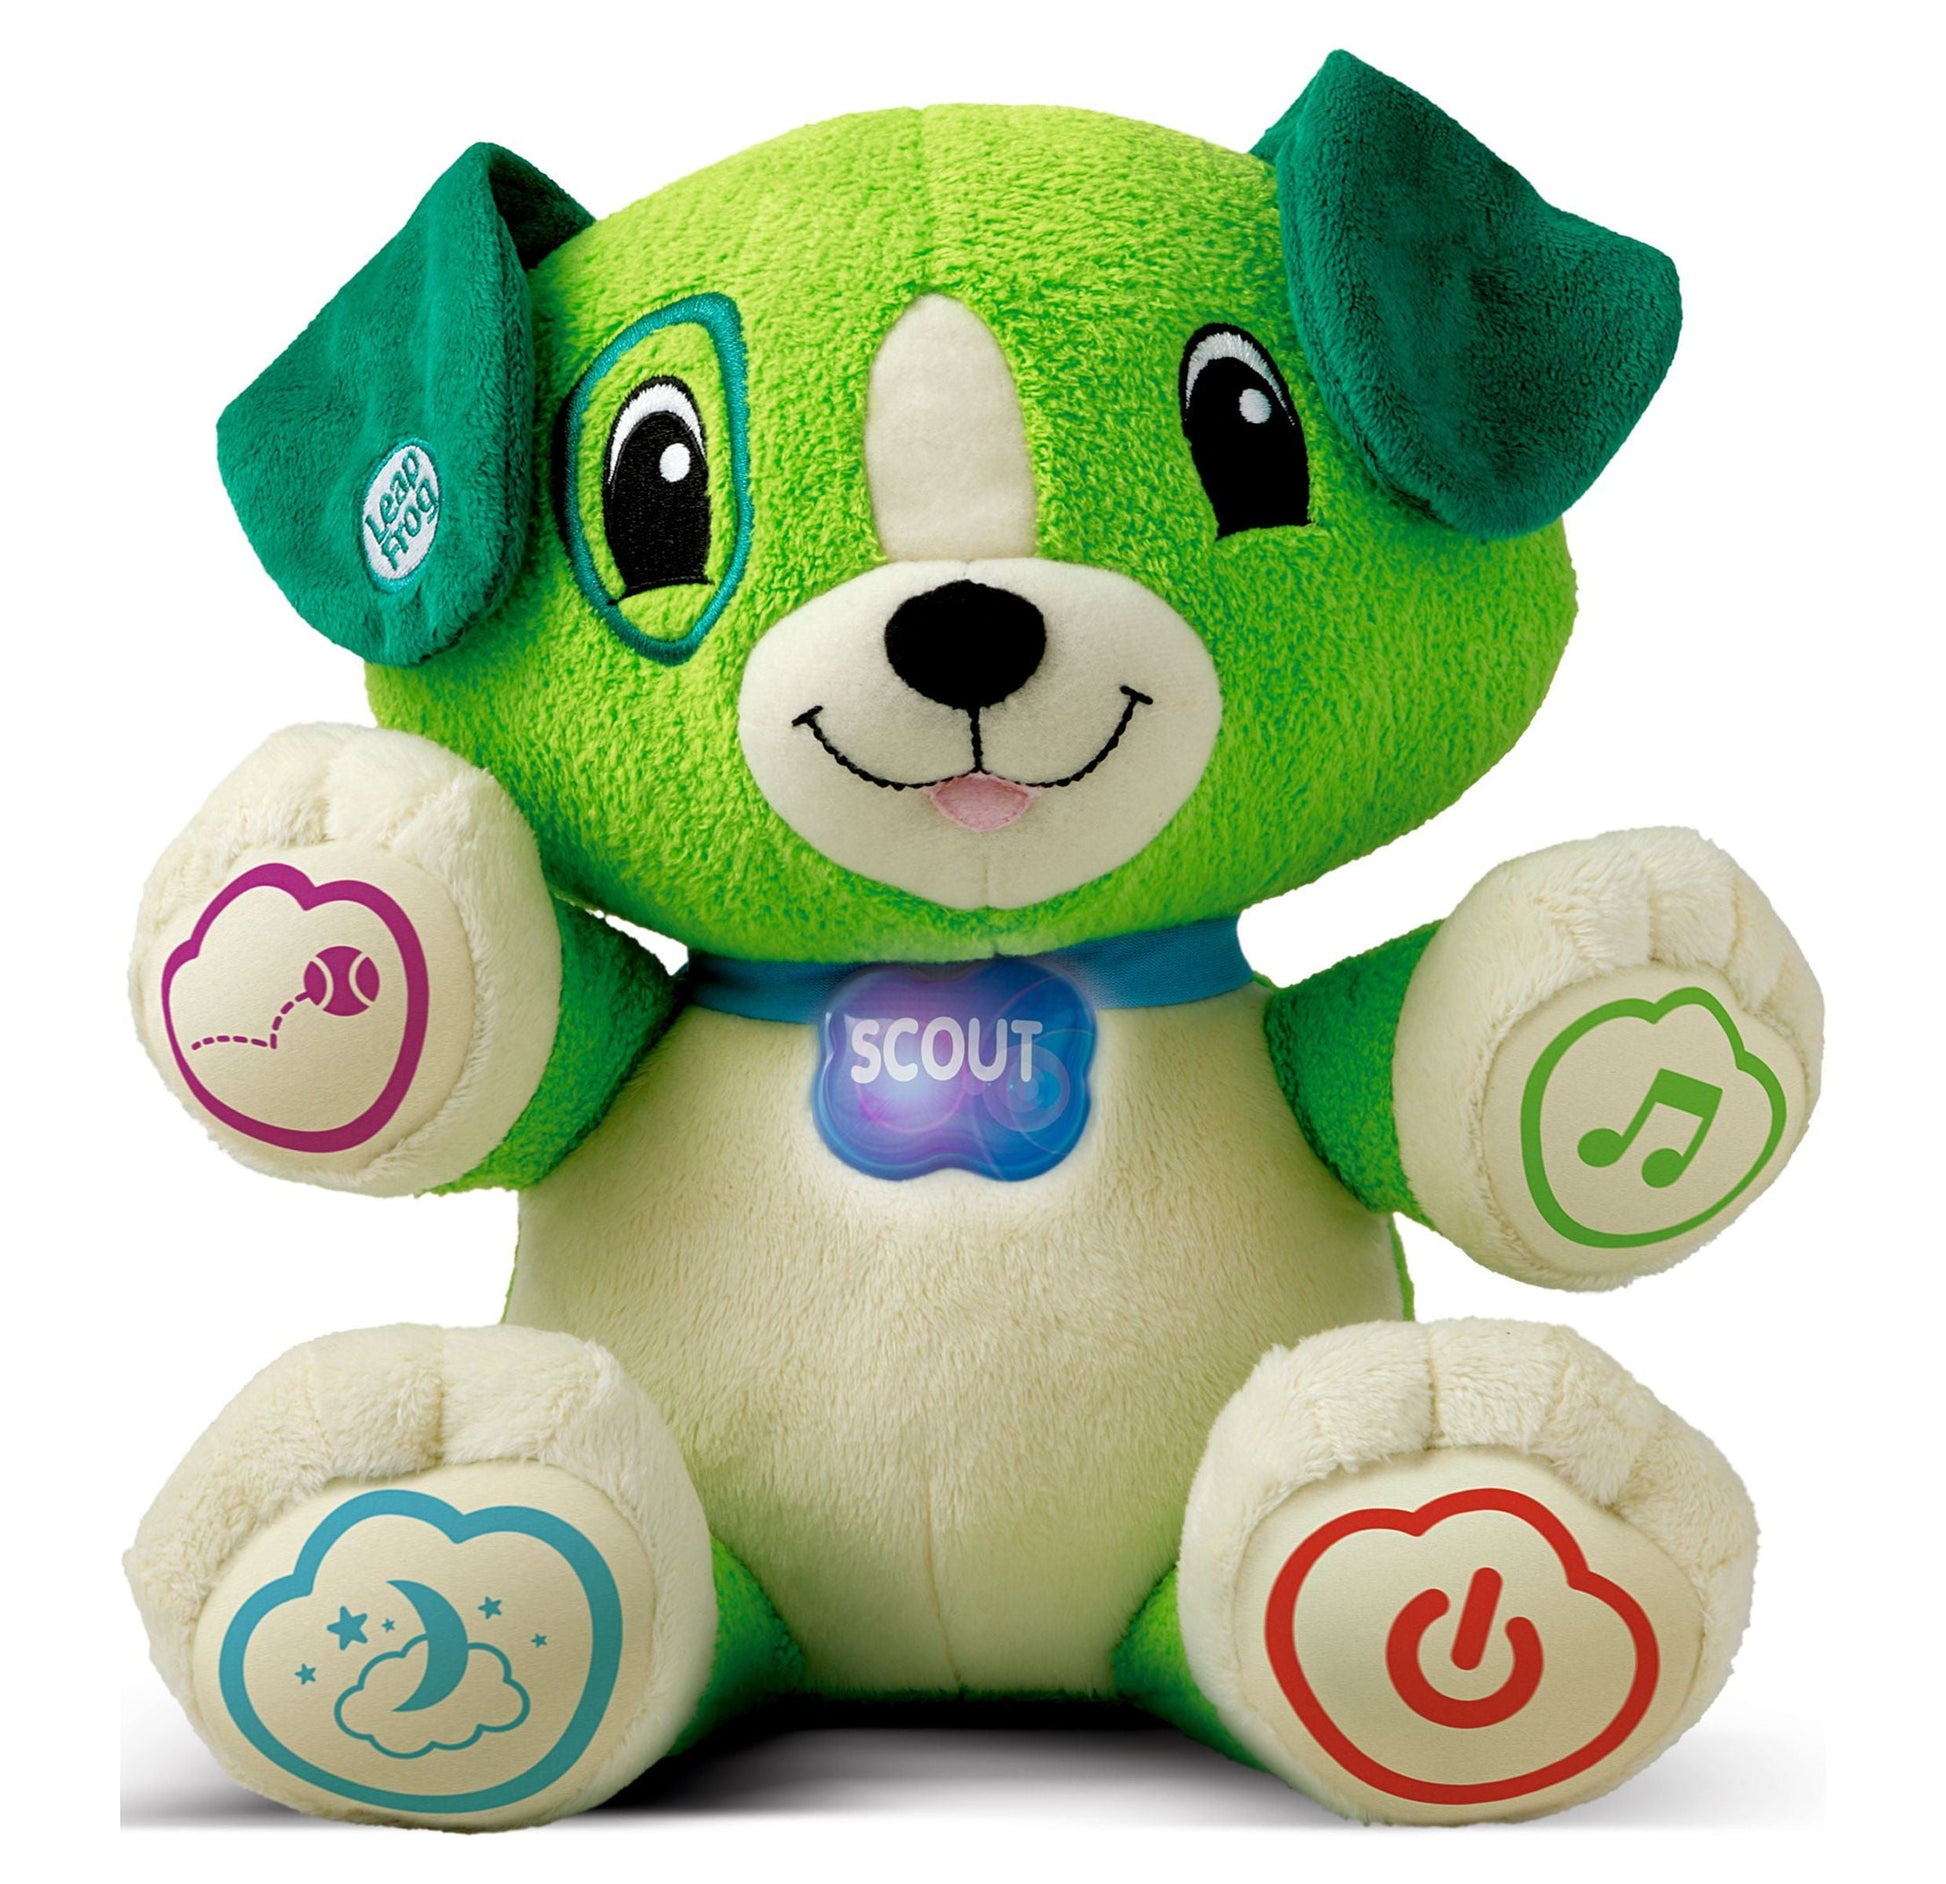 , My Pal Scout, Plush Puppy, Baby Learning Toy